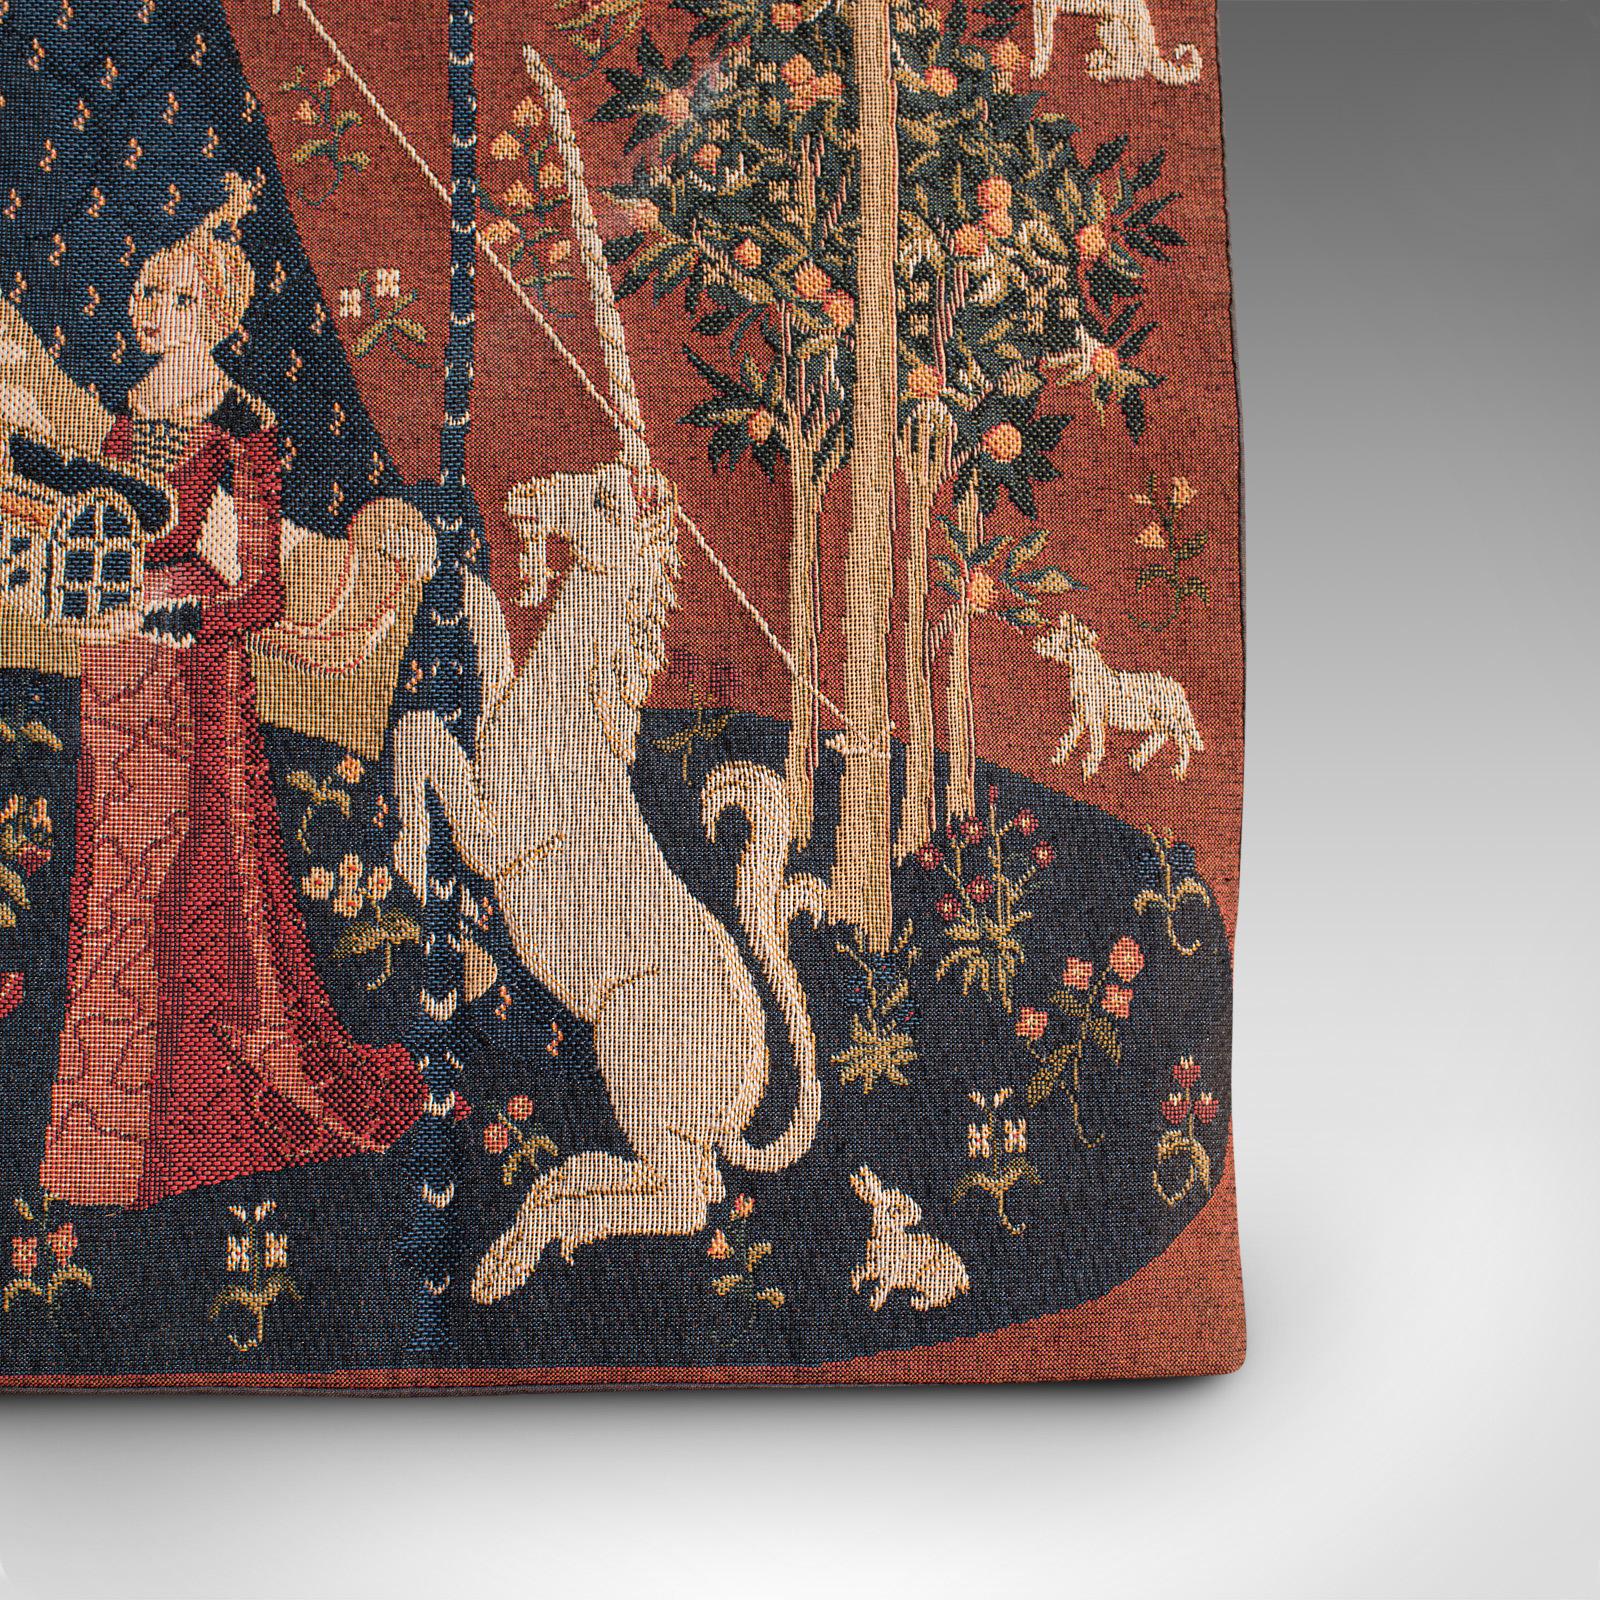 Textile Petite Vintage Tapestry, French, Hanging Needlepoint, The Lady and The Unicorn For Sale